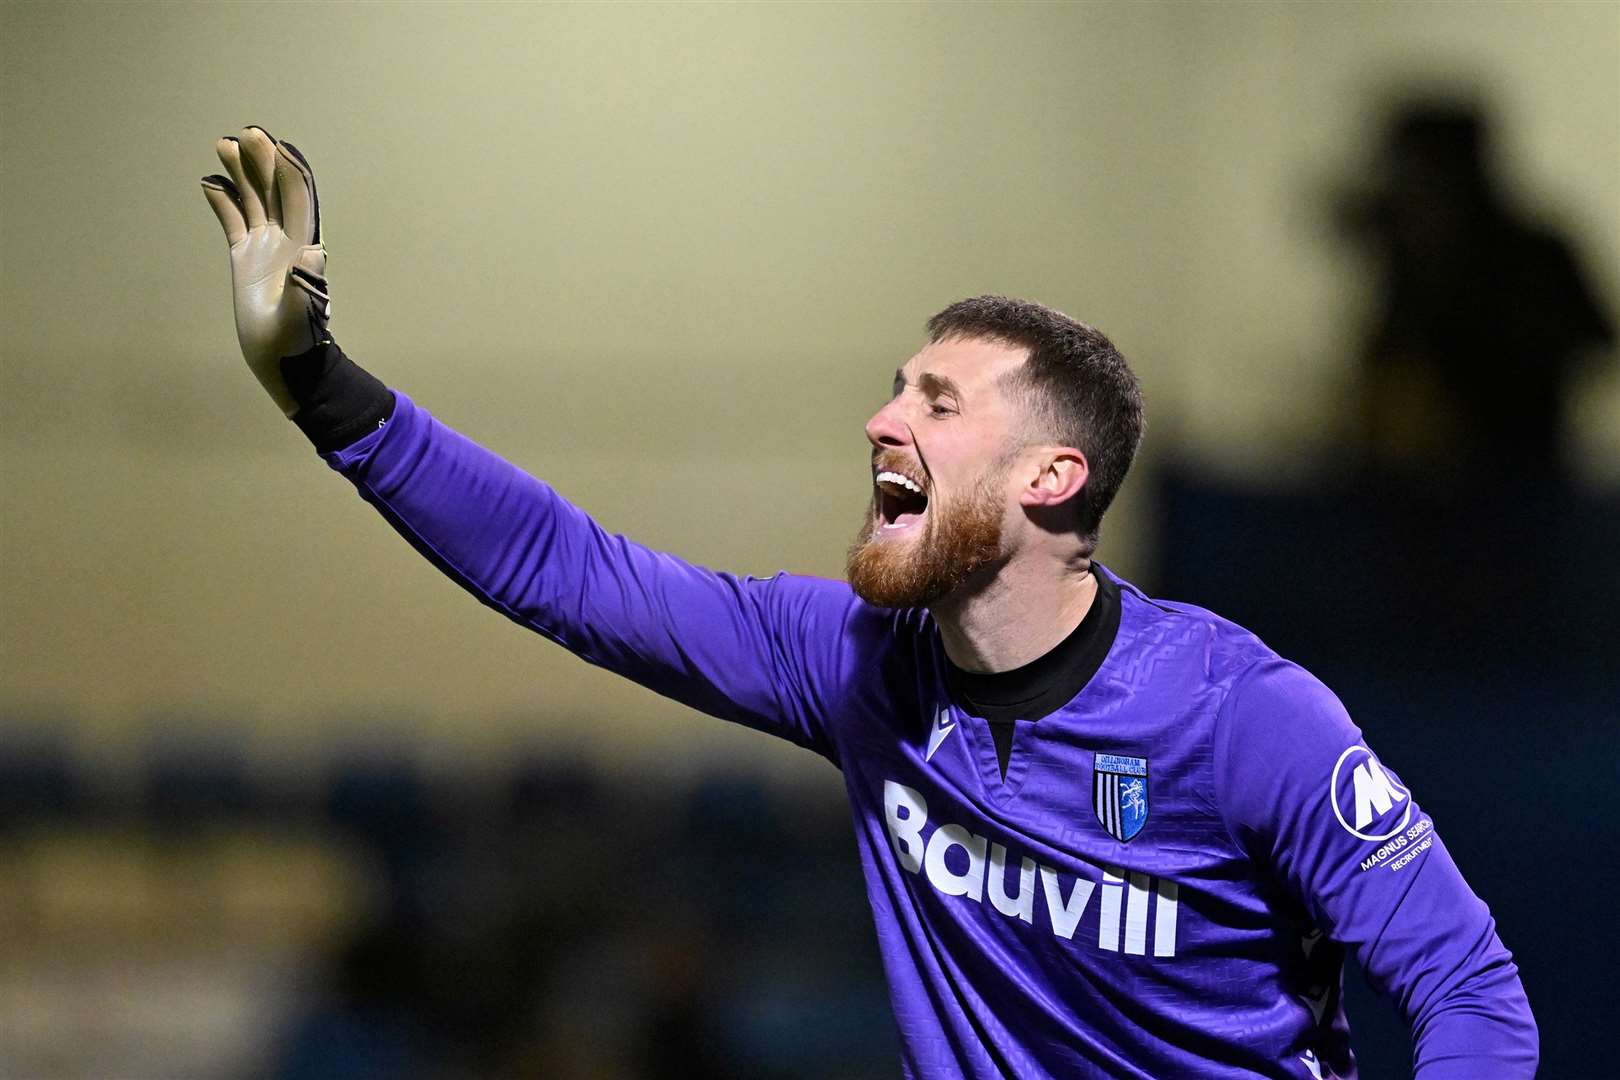 Jake Turner helped the Gills beat Charlton Athletic 2-0 in the FA Cup Picture: Keith Gillard